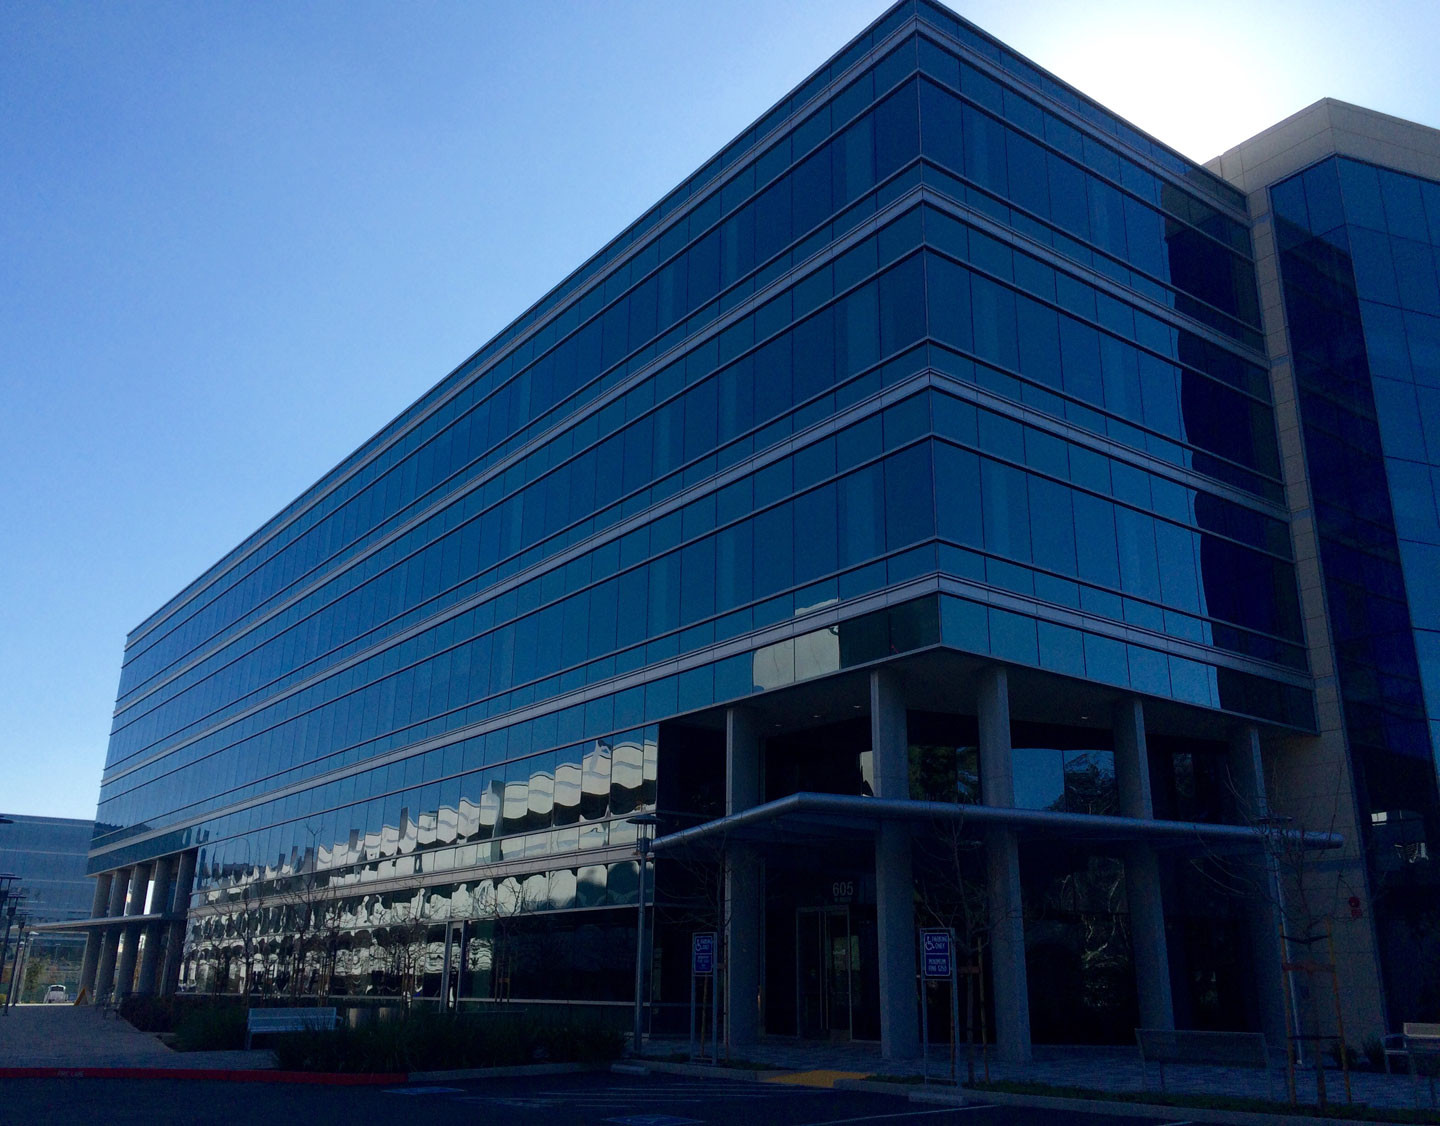 The new LinkedIn office in Sunnyvale was built by global developer Kilroy Realty based in Los Angeles.   Beth Willon/KQED